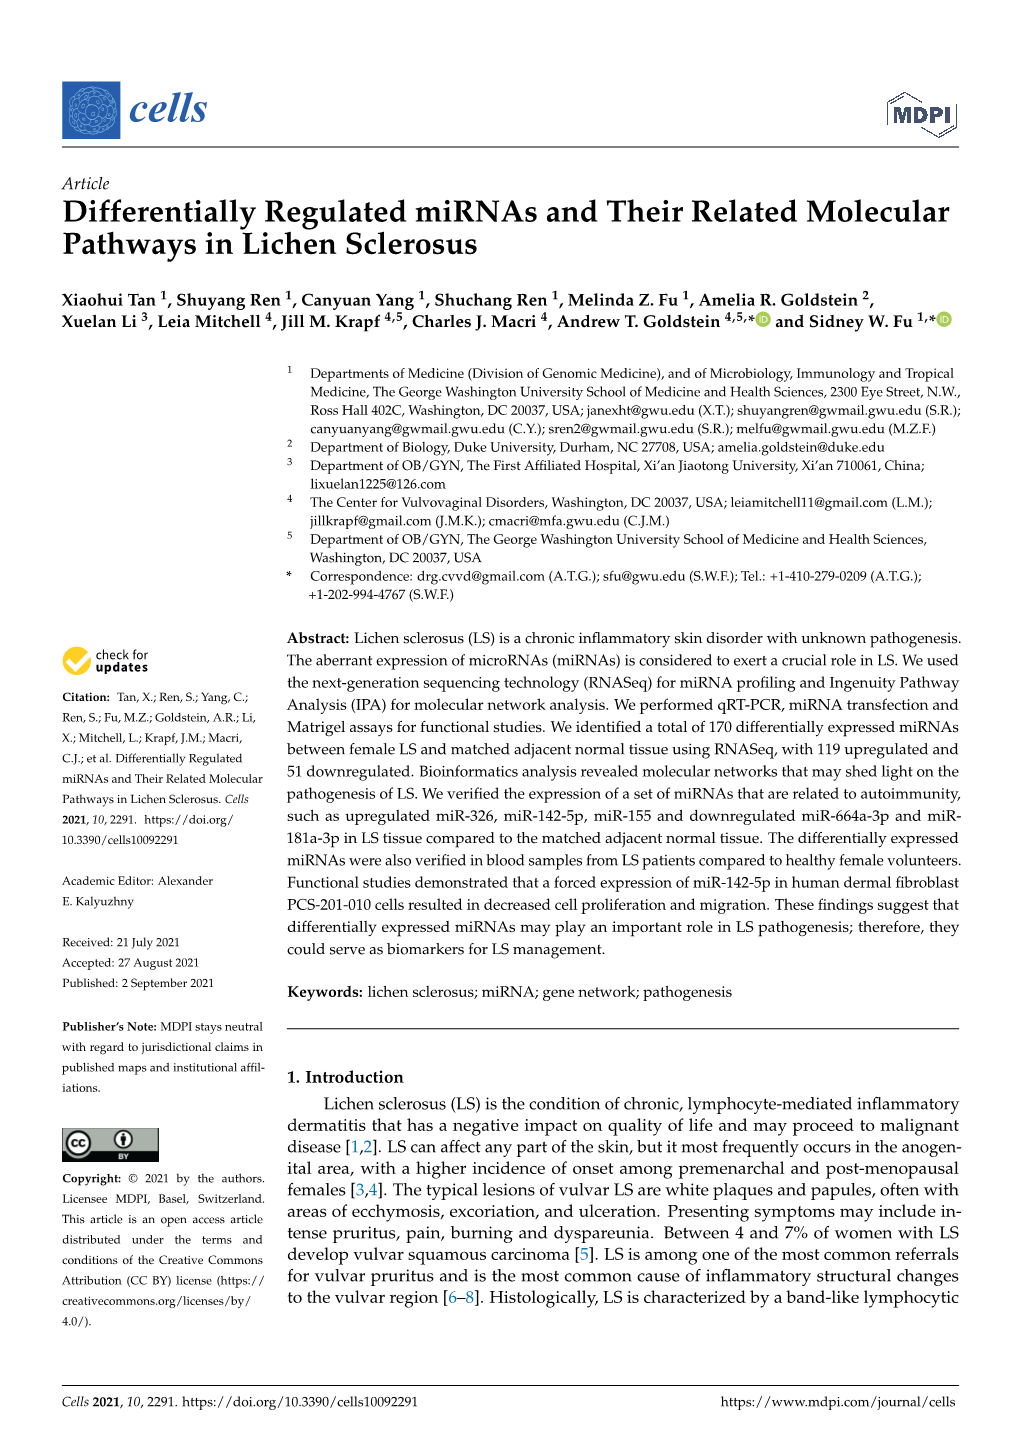 Differentially Regulated Mirnas and Their Related Molecular Pathways in Lichen Sclerosus